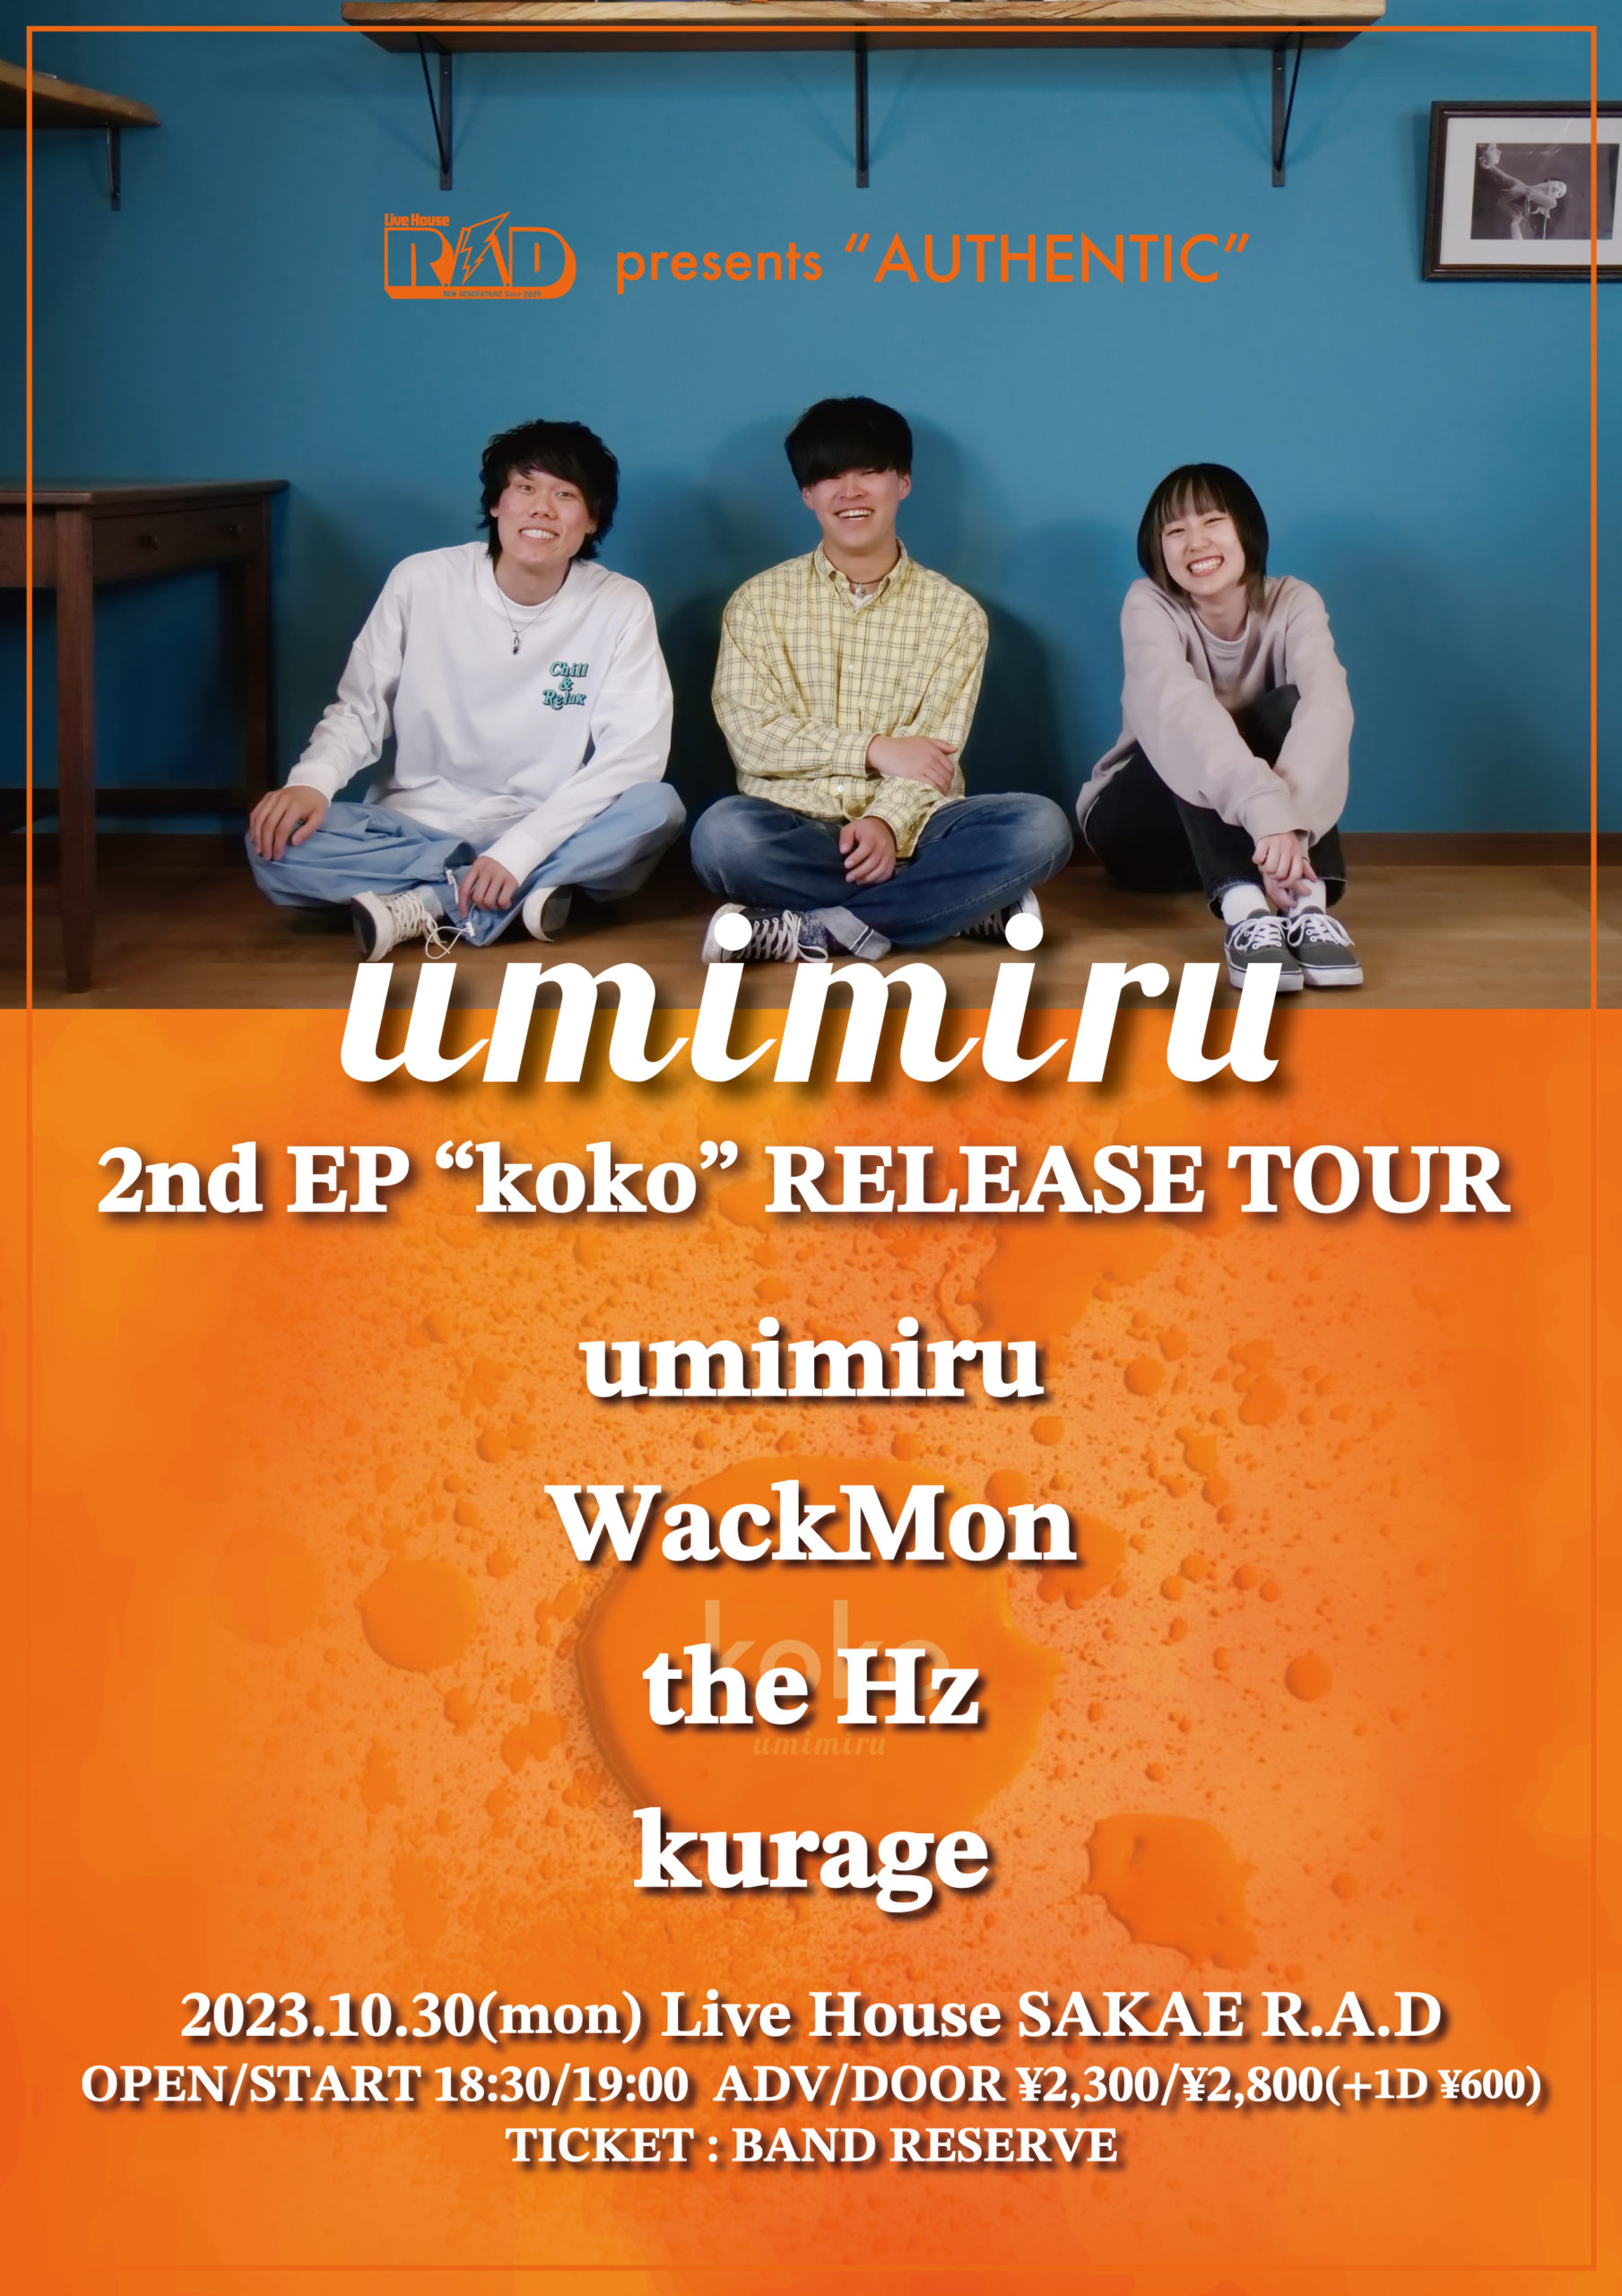 R.A.D presents "AUTHENTIC" umimiru 2nd EP “koko” RELEASE TOUR